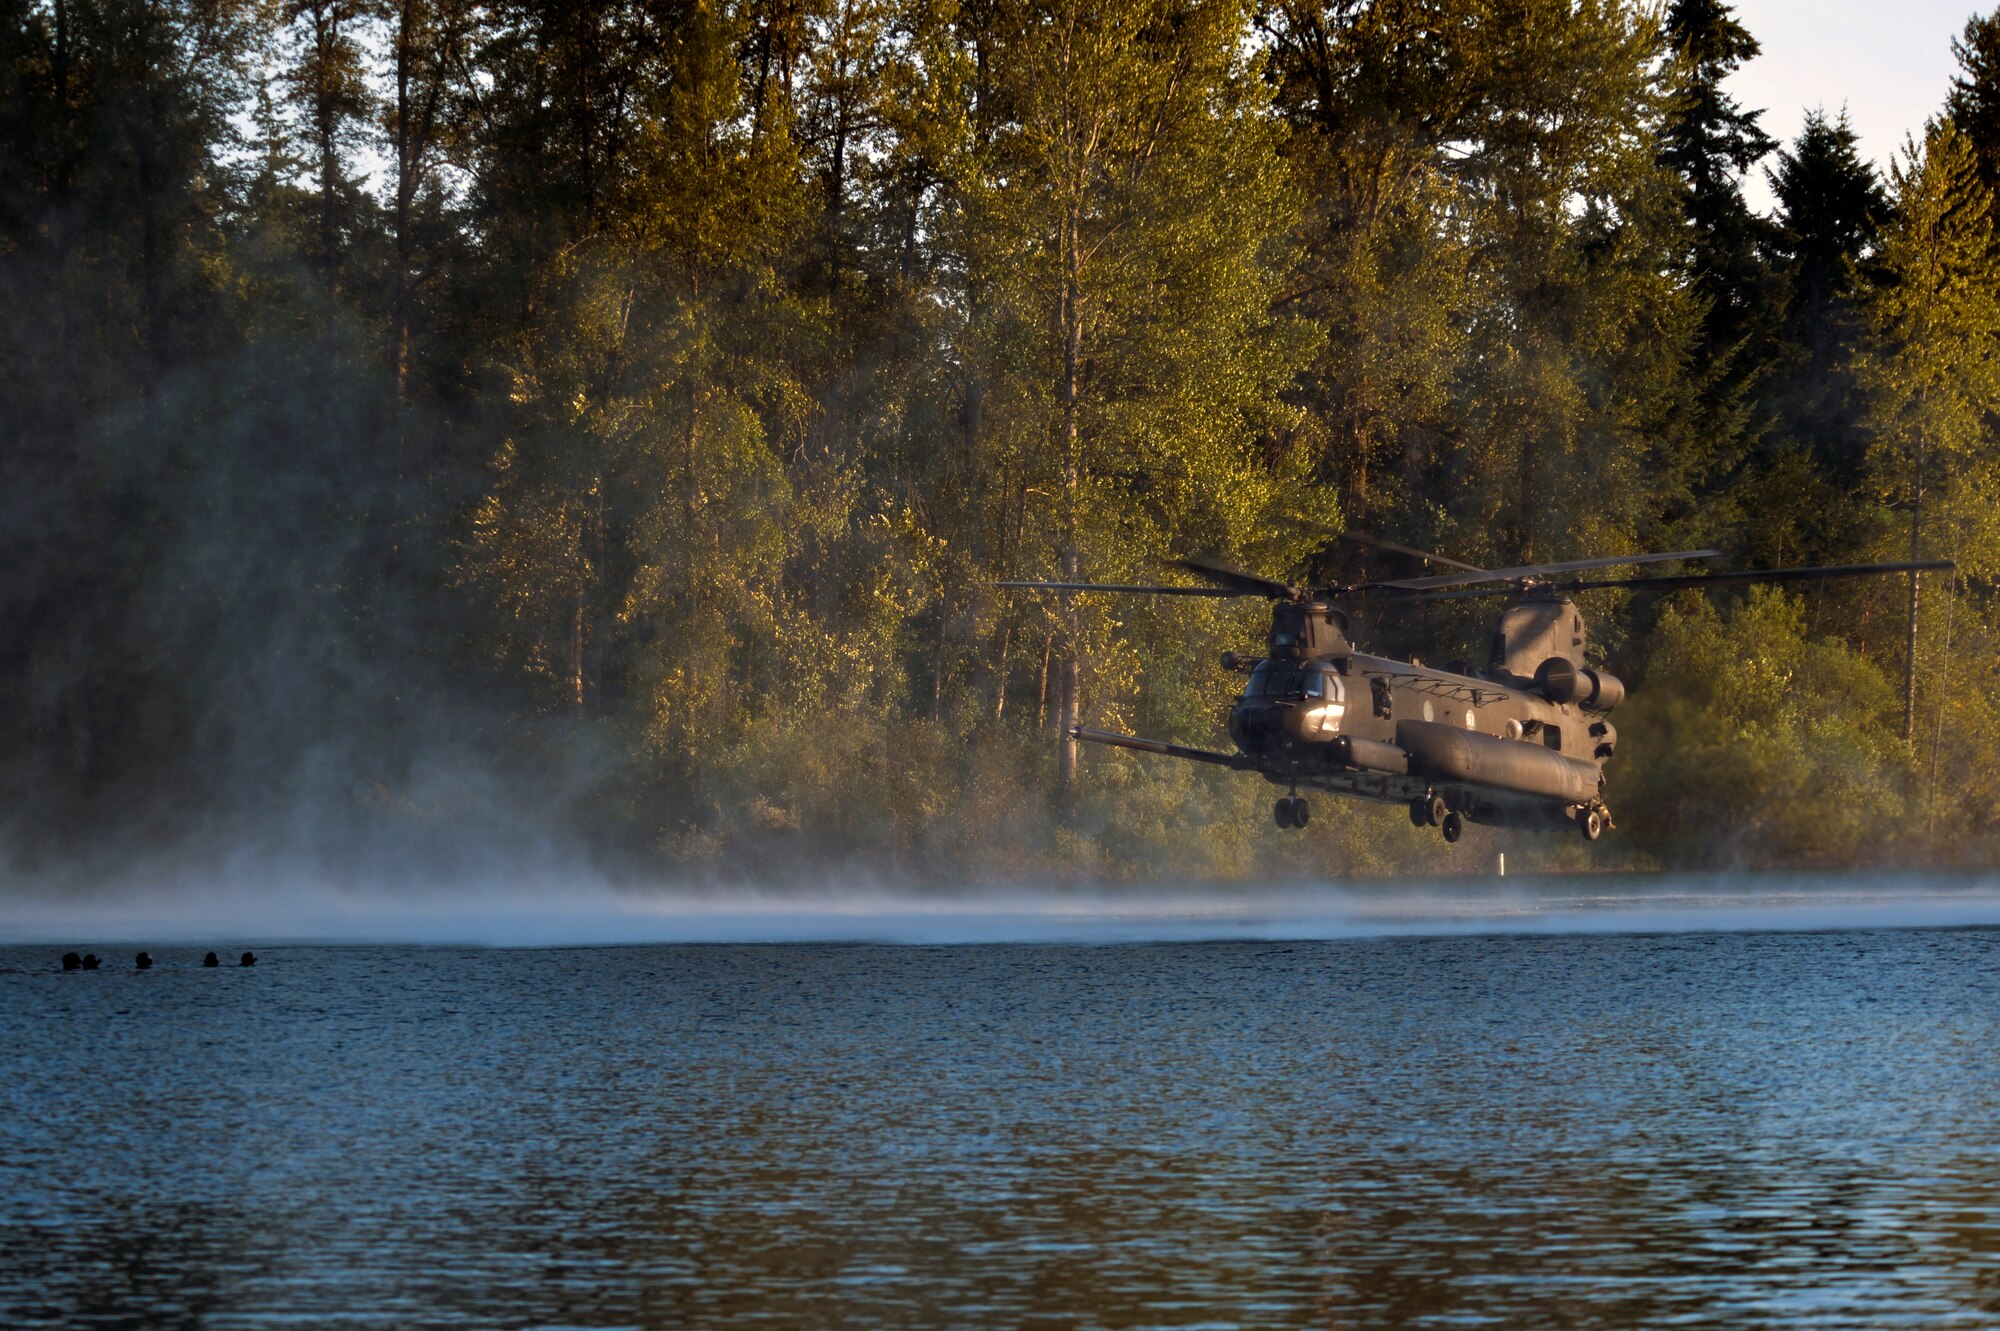 Airmen from the 22nd Special Tactics Squadron’s Red Team wait in American Lake July 14, 2014, for an MH-47 Chinook helicopter to extract them during helocast alternate insertion and extraction training with Soldiers from the 160th Special Operations Aviation Regiment at Joint Base Lewis-McChord, Wash. Soldiers from the 160th SOAR needed the AEI training and called upon members of the 22nd STS for assistance. (U.S. Air Force photo/Staff Sgt.Russ Jackson)